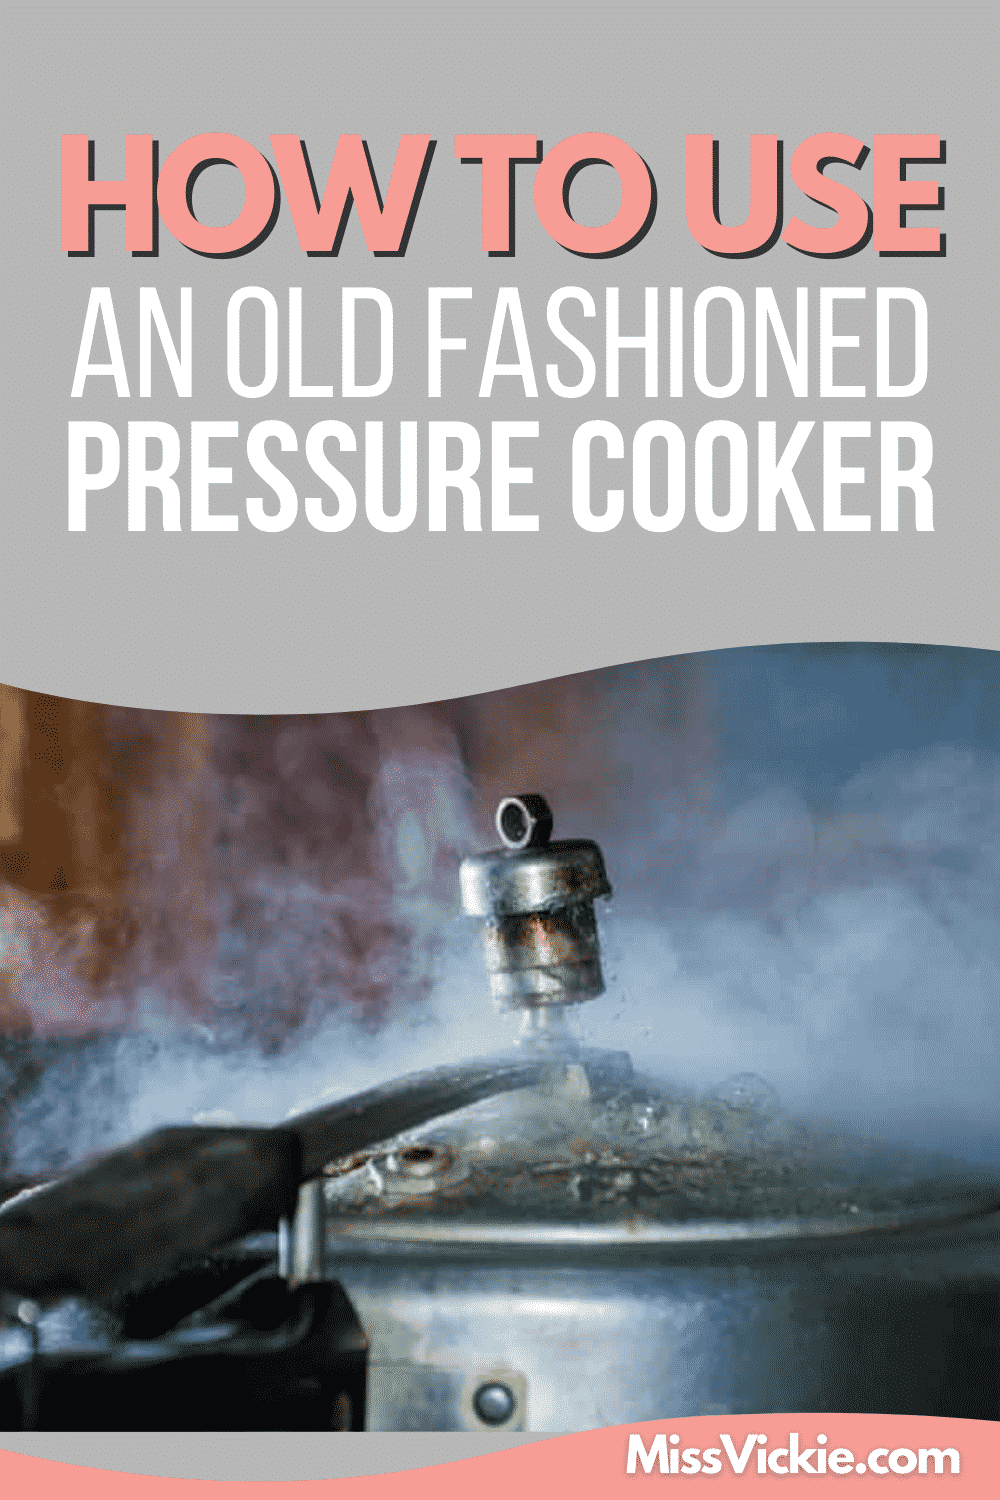 How To Use An Old Fashioned Pressure Cooker